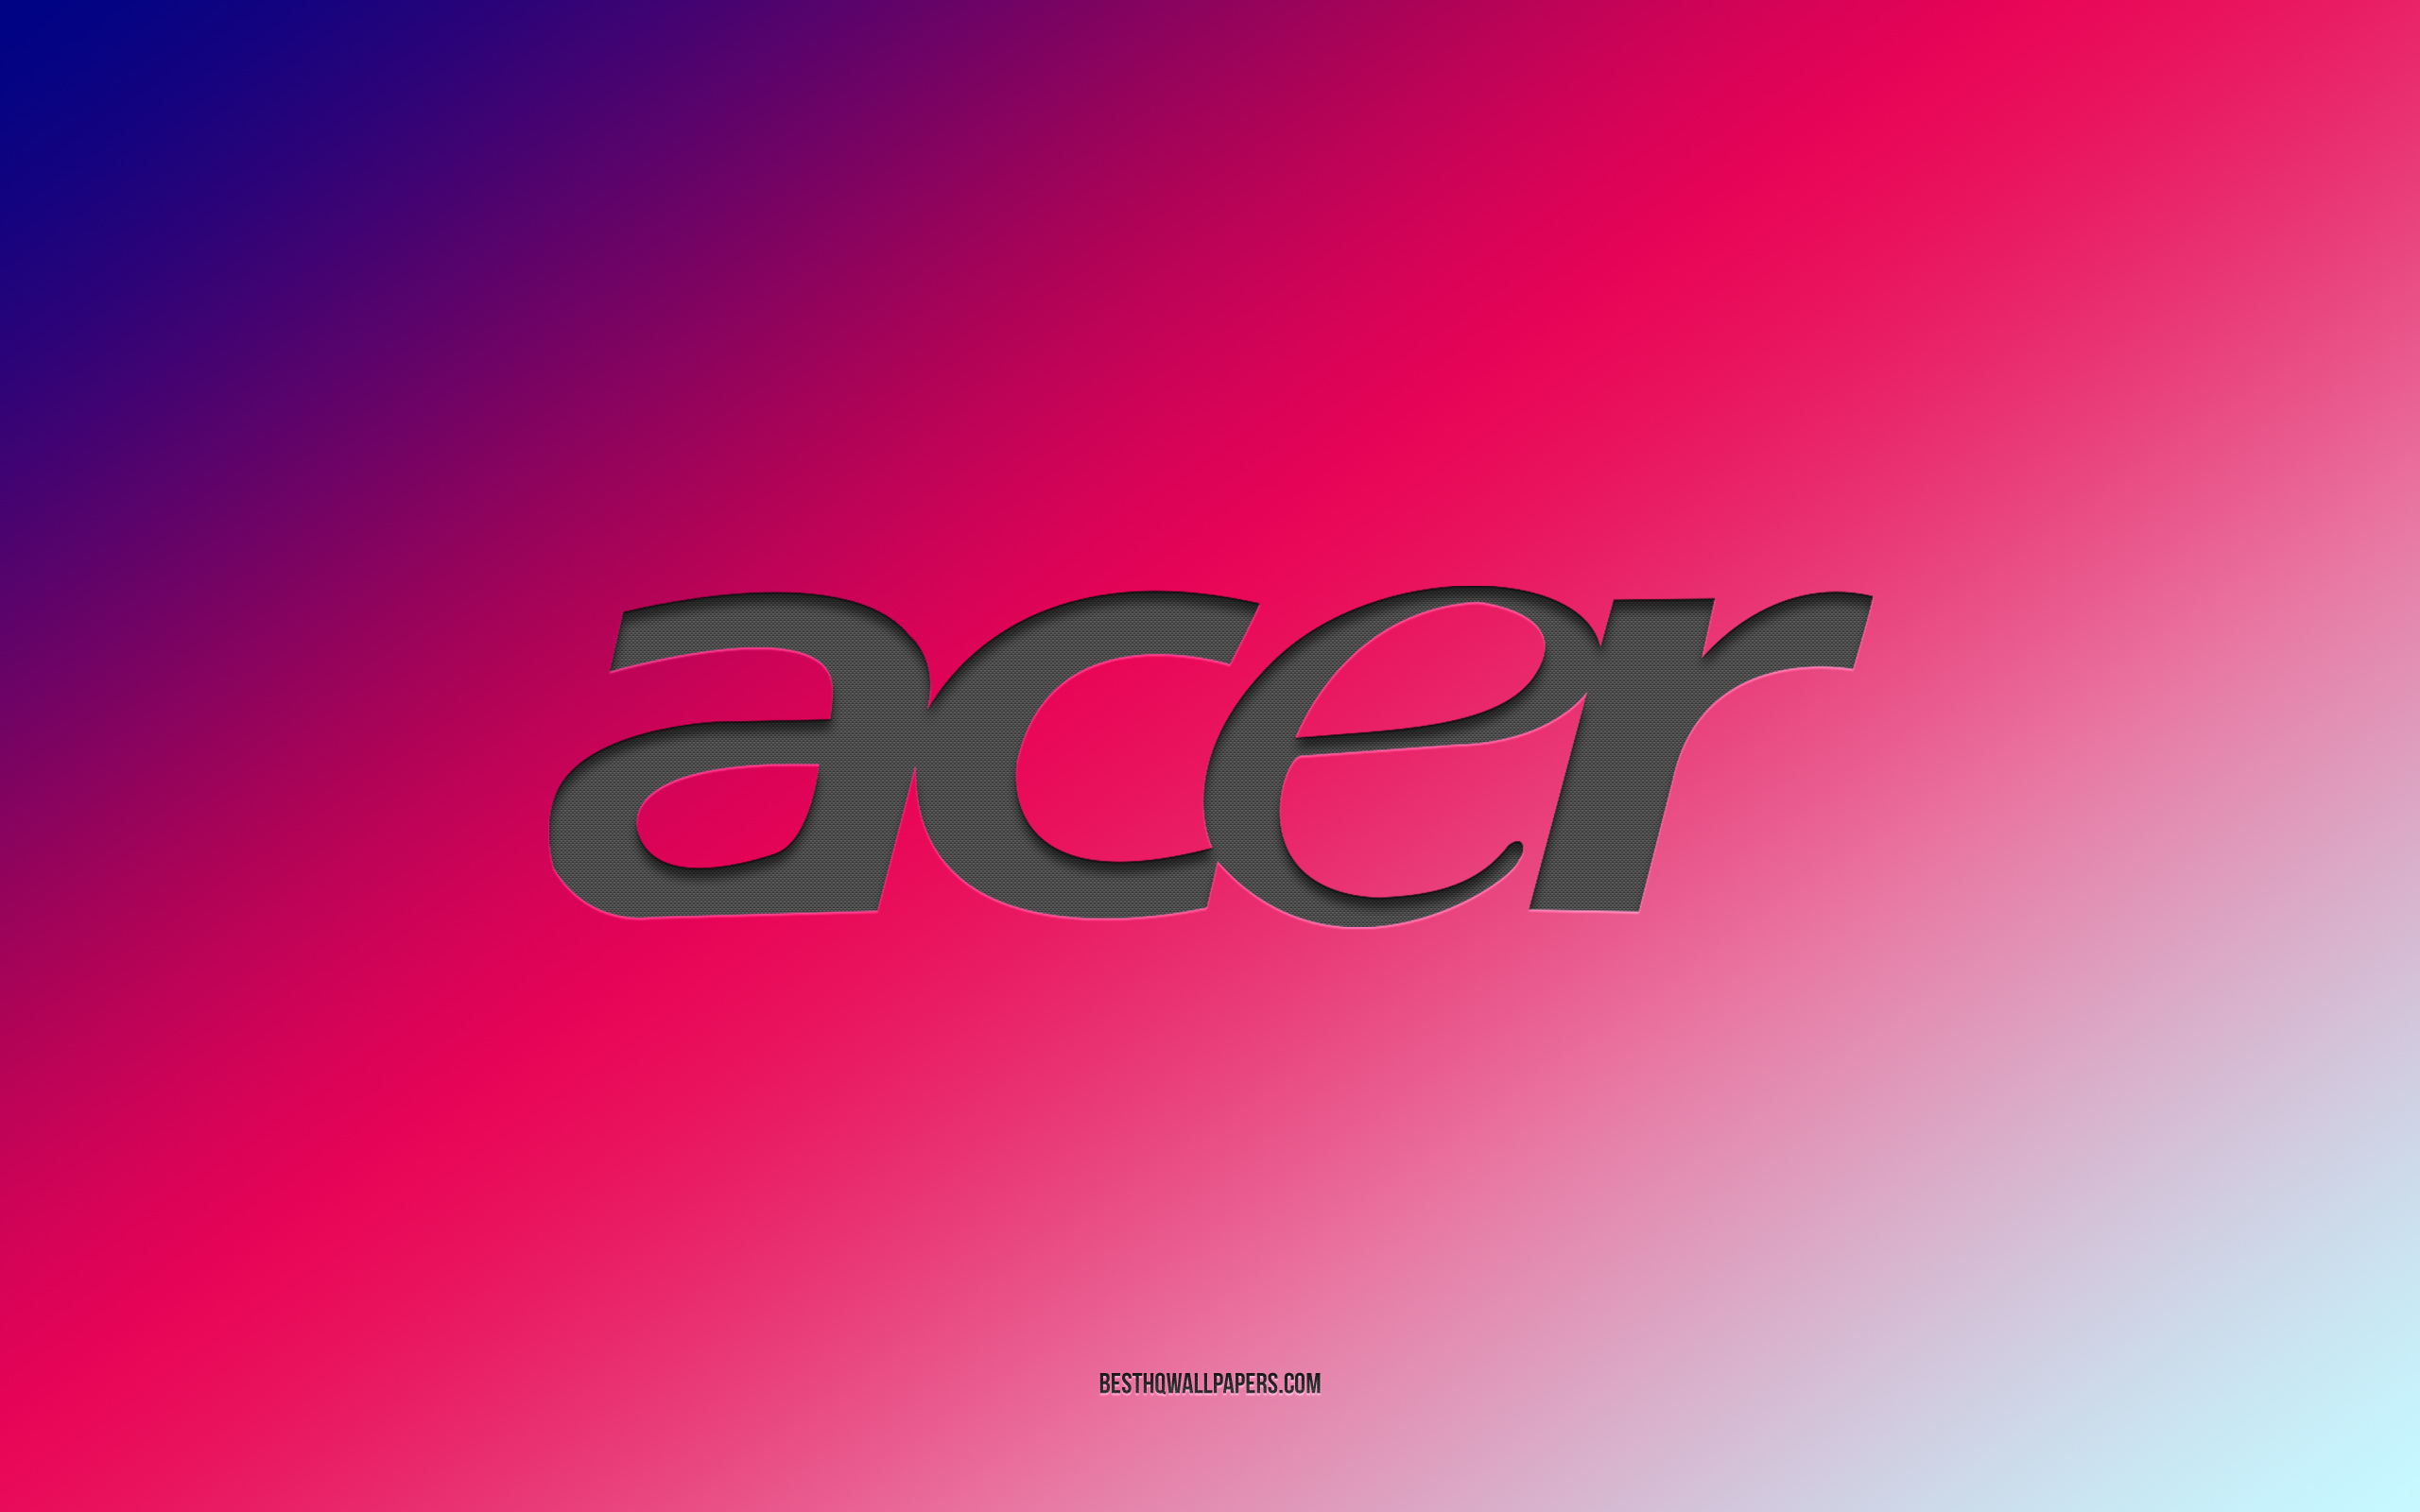 Download wallpapers Acer logo, purple pink background, Acer carbon logo,  purple pink paper texture, Acer emblem, Acer for desktop with resolution  2560x1600. High Quality HD pictures wallpapers